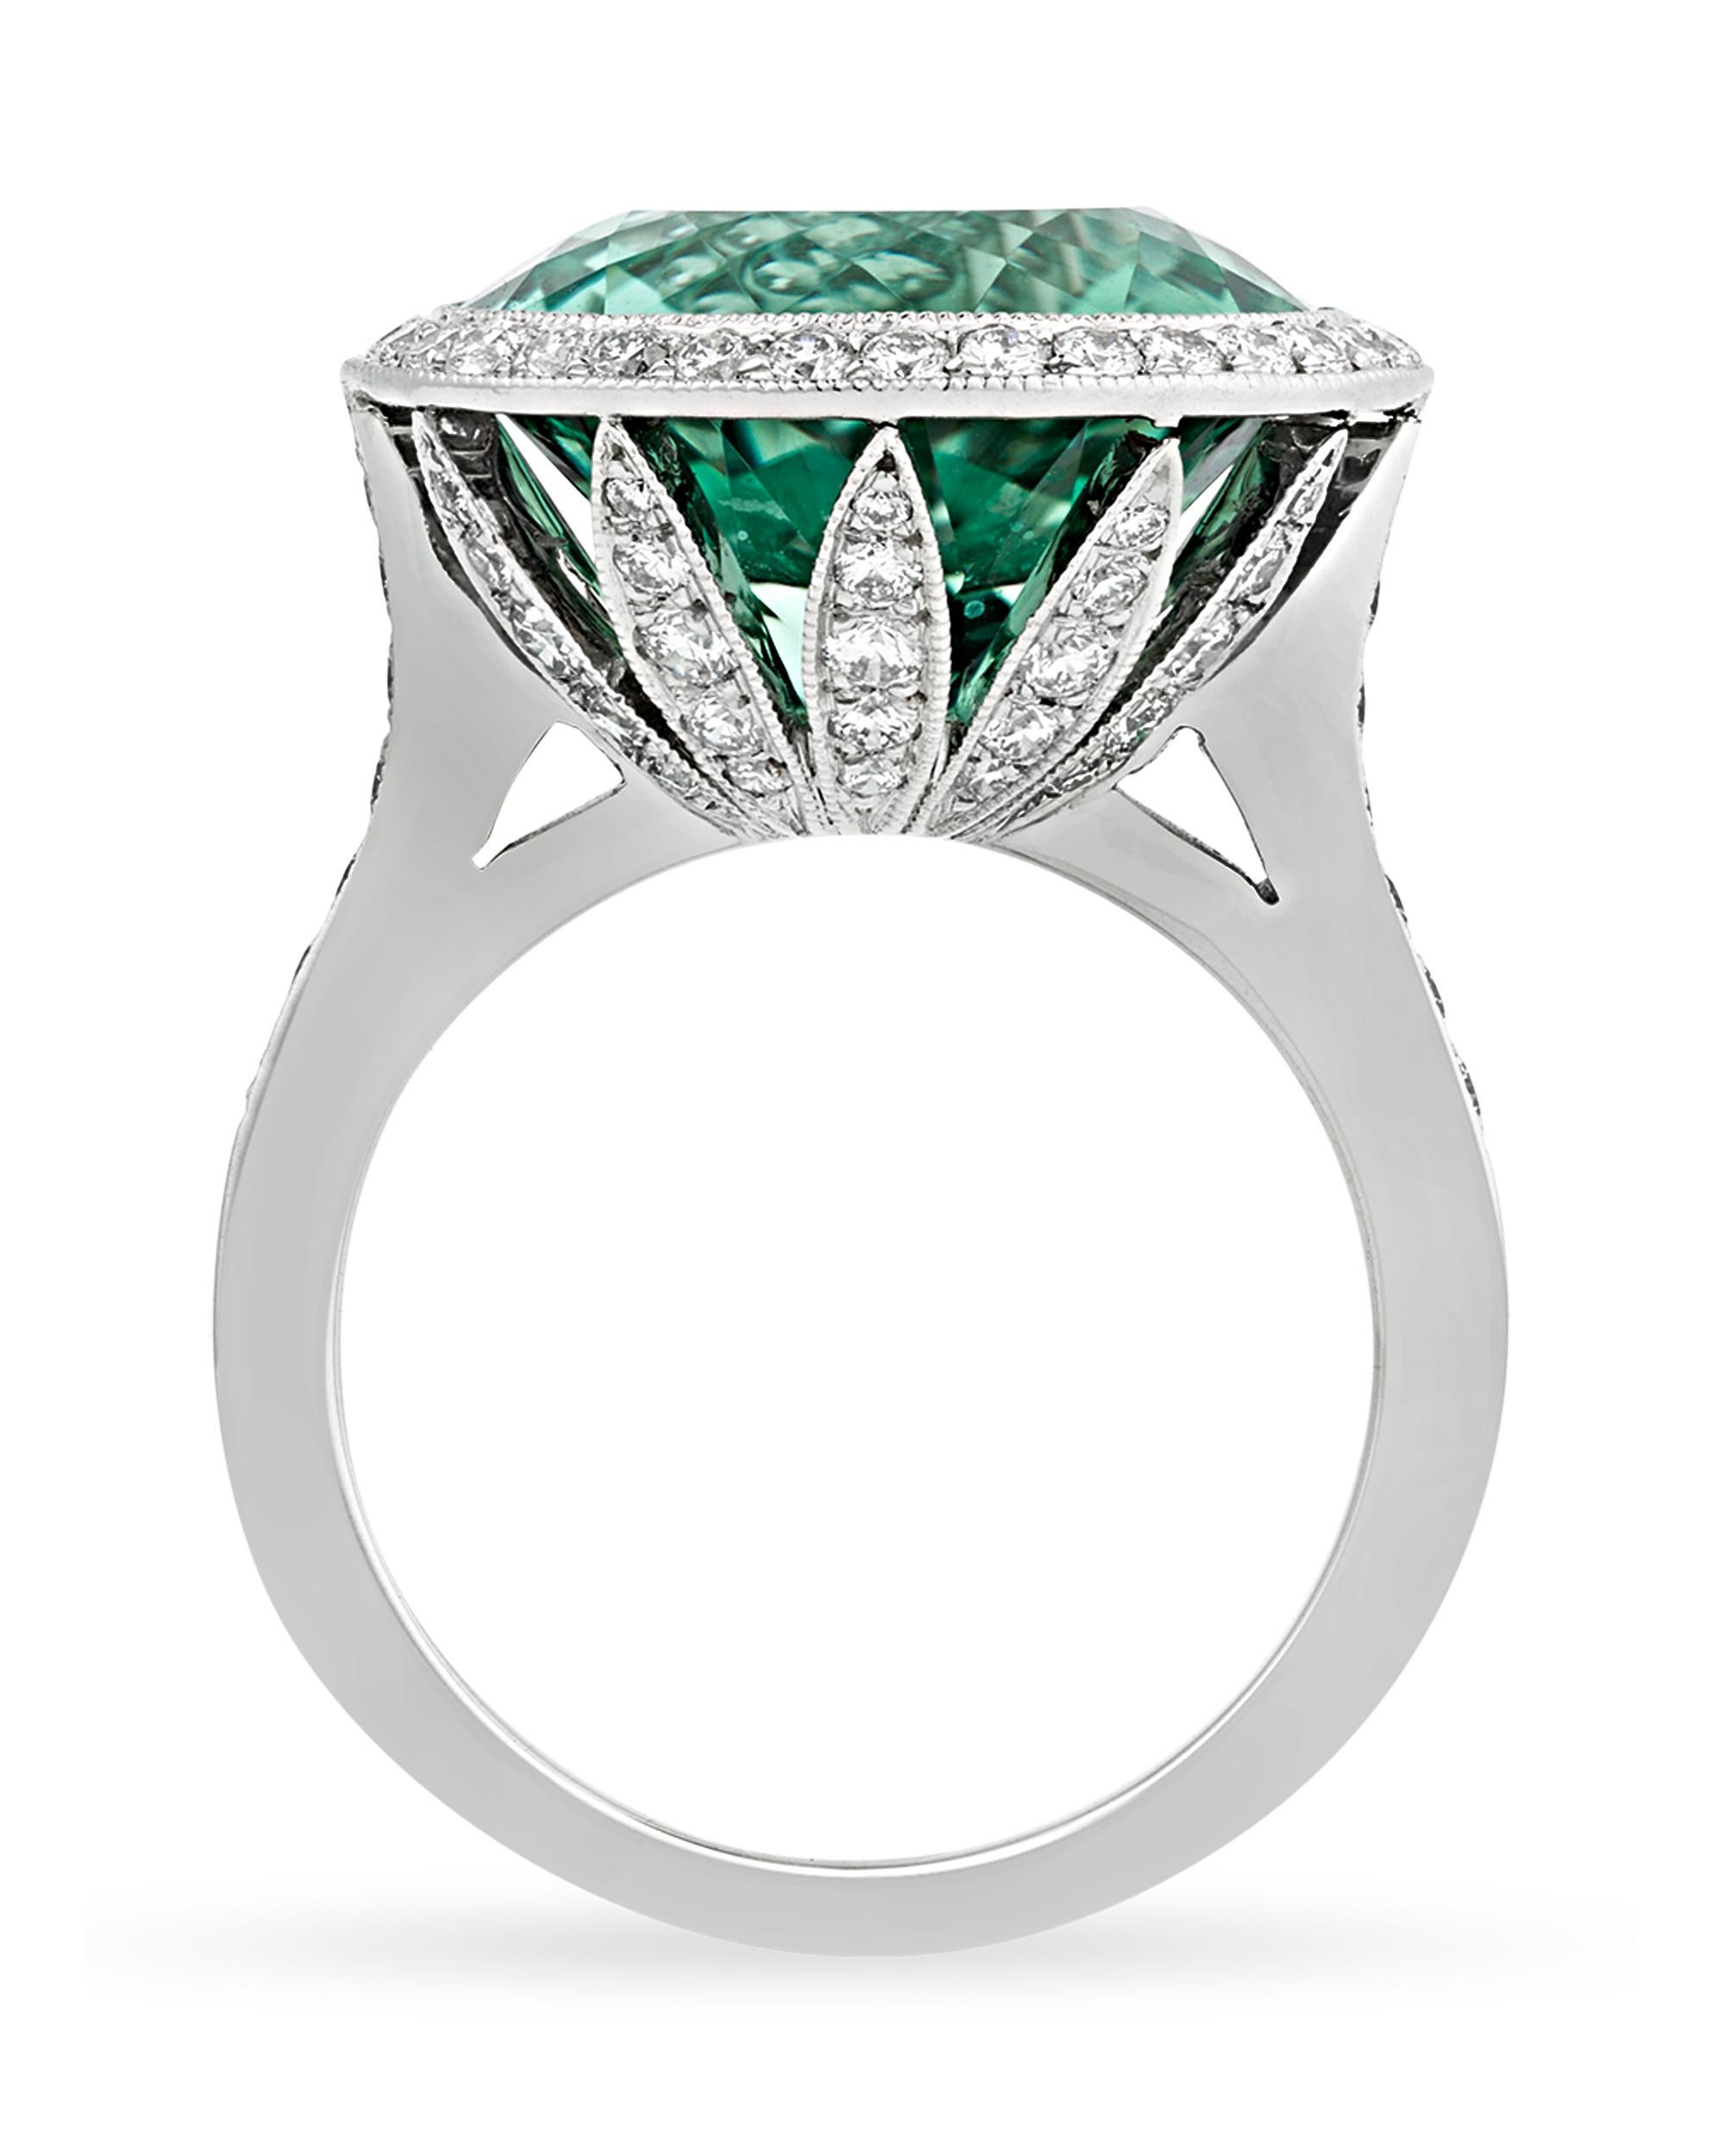 A stunning round green tourmaline weighing 8.73 carats is at the center of this classic ring by Tiffany & Co. Displaying a crisp, green hue, the gemstone is complemented by round brilliant-cut diamonds totaling 0.86 carat that display G color and